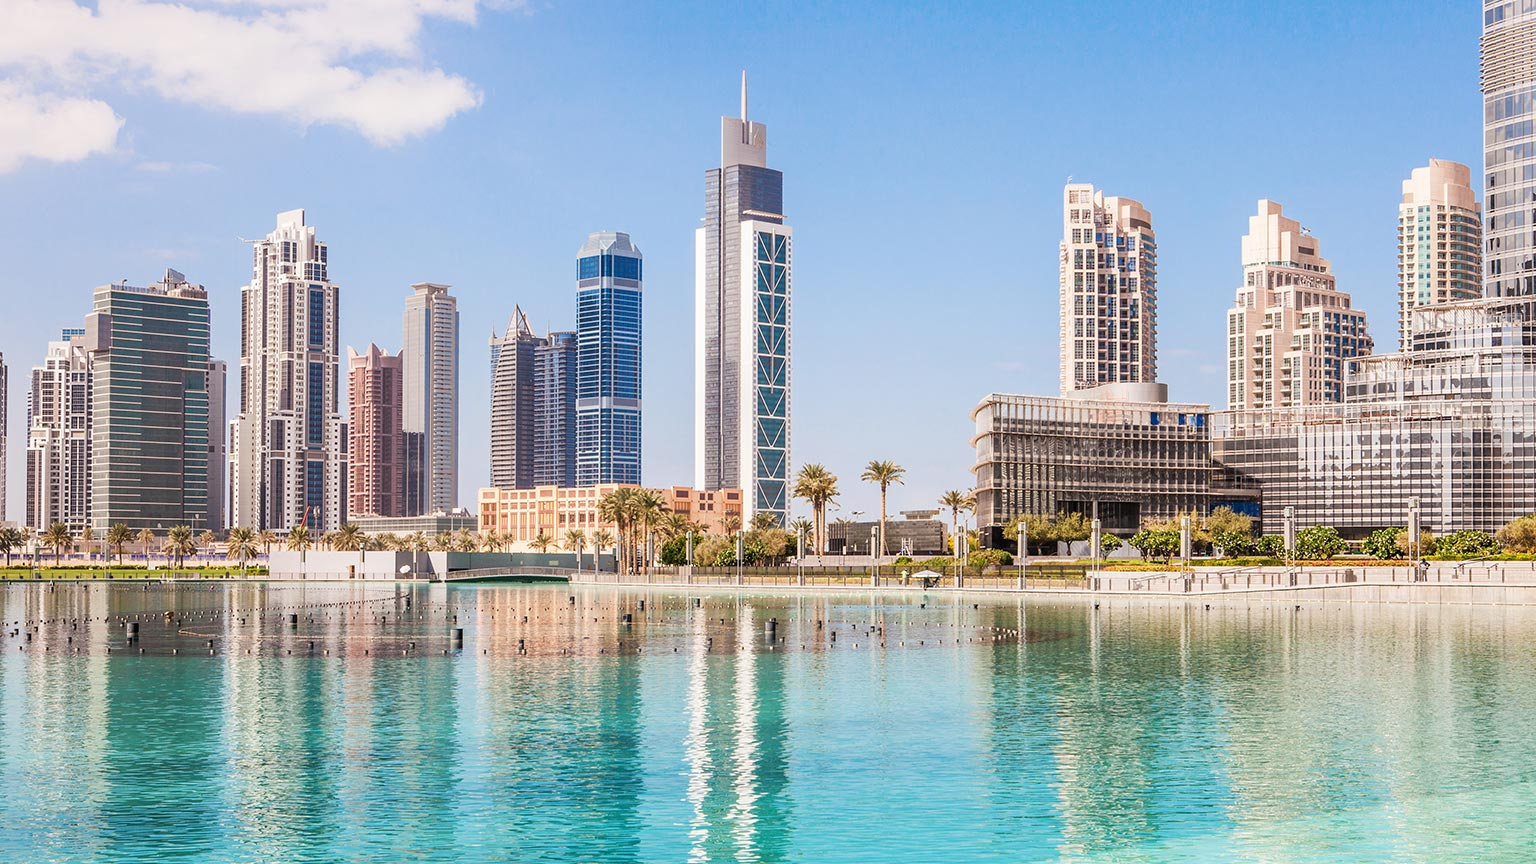 Property market in Dubai is predicted to cultivate more success in the coming year.